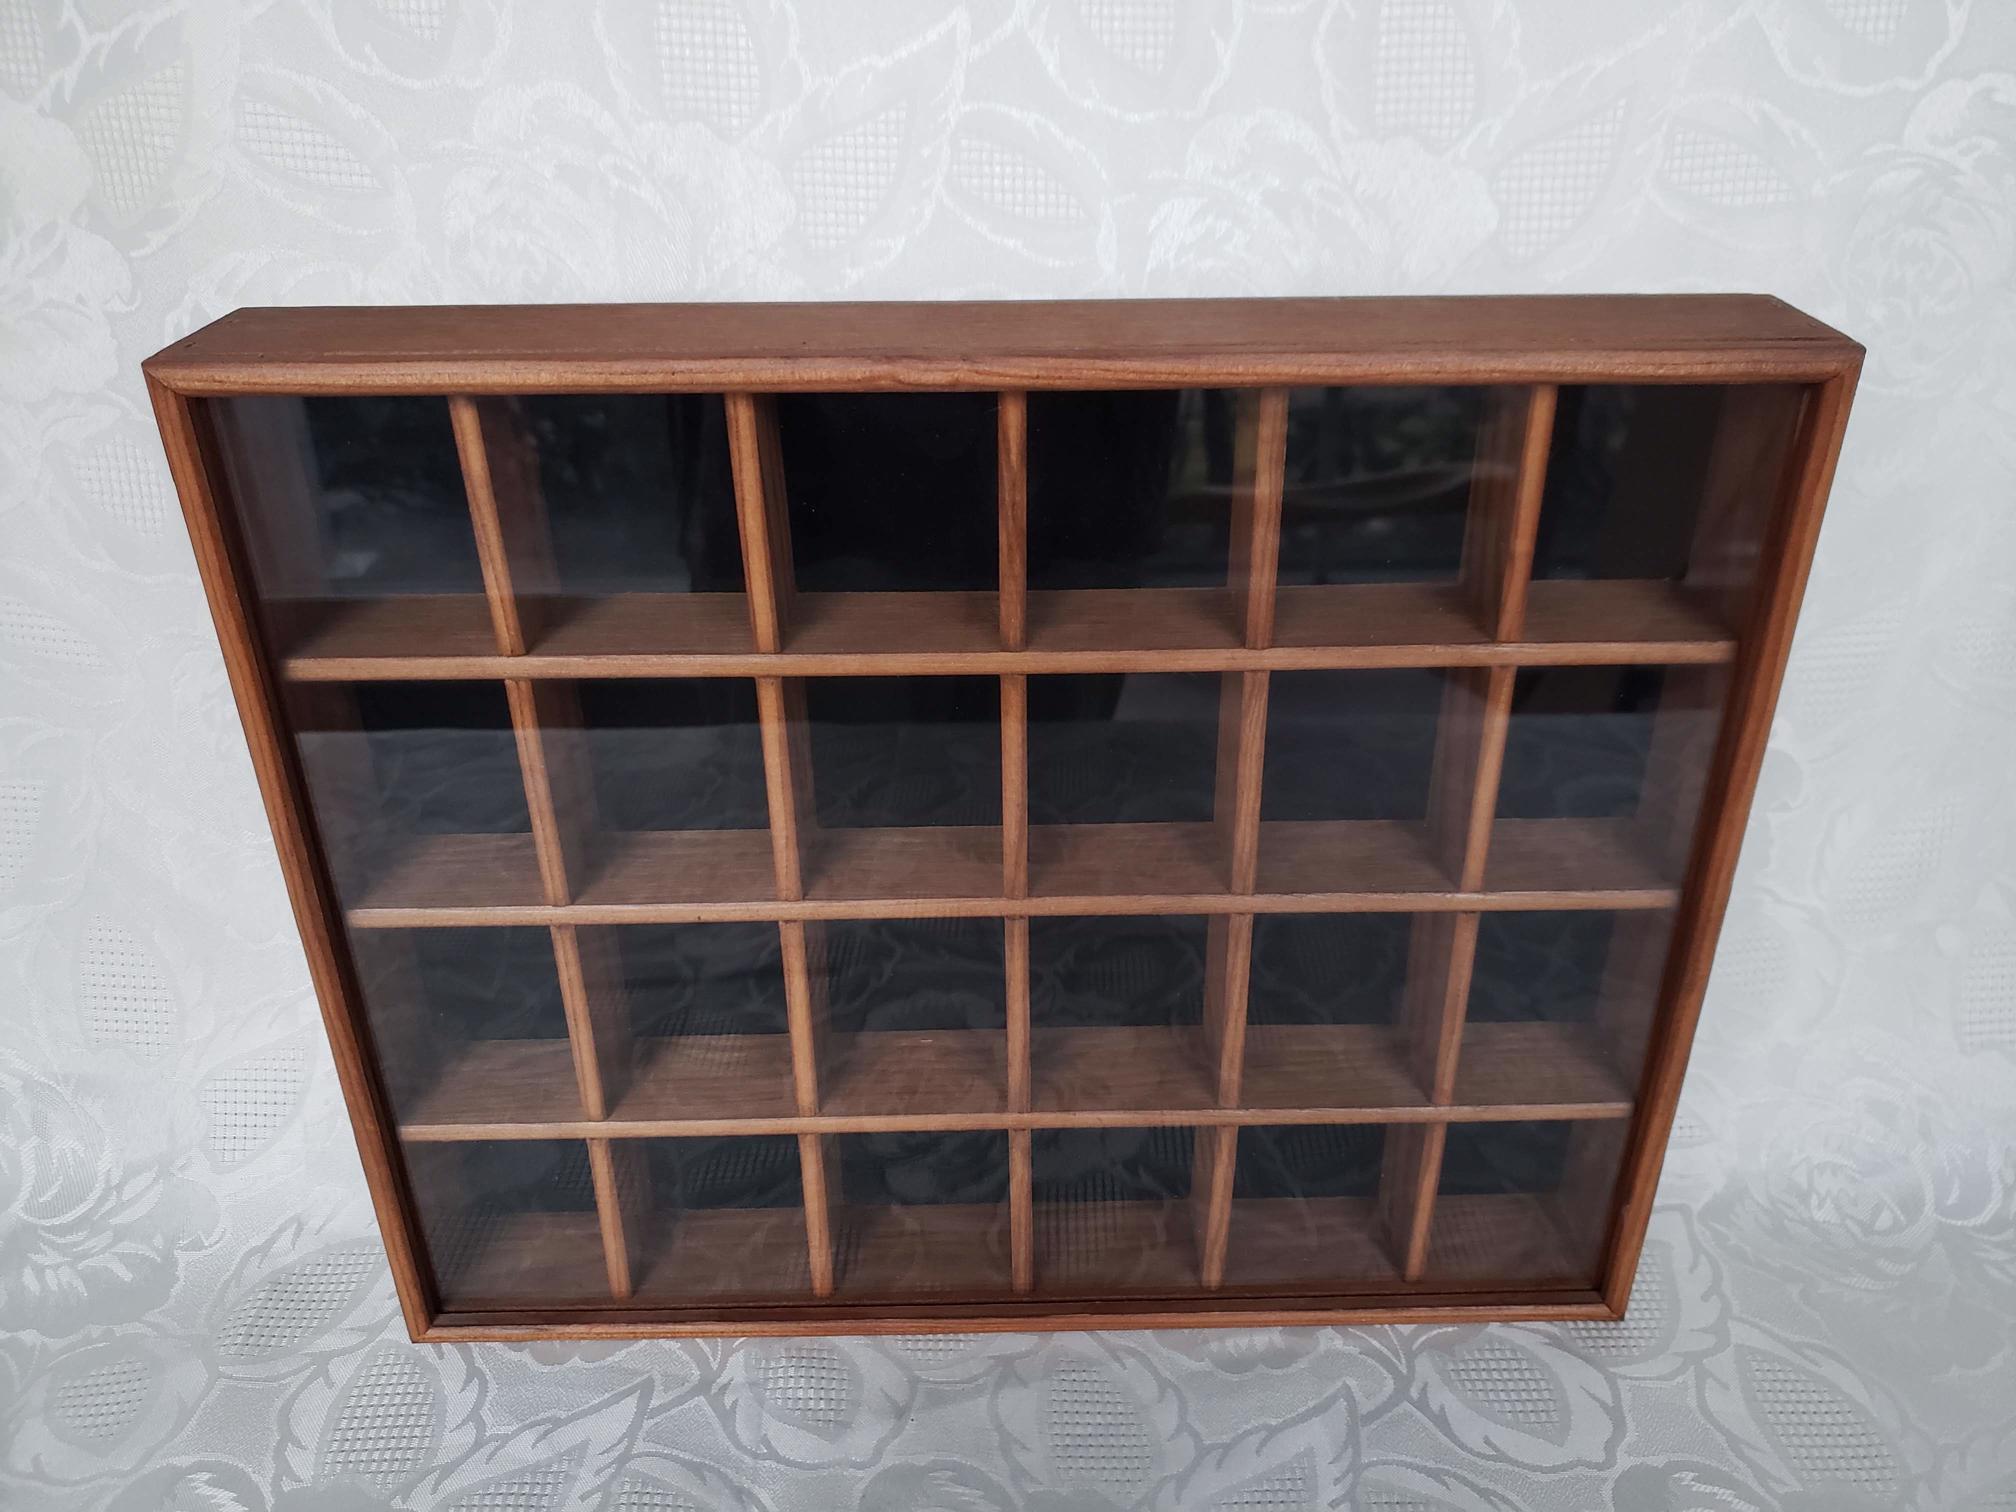 Wooden Thimble Display Cases